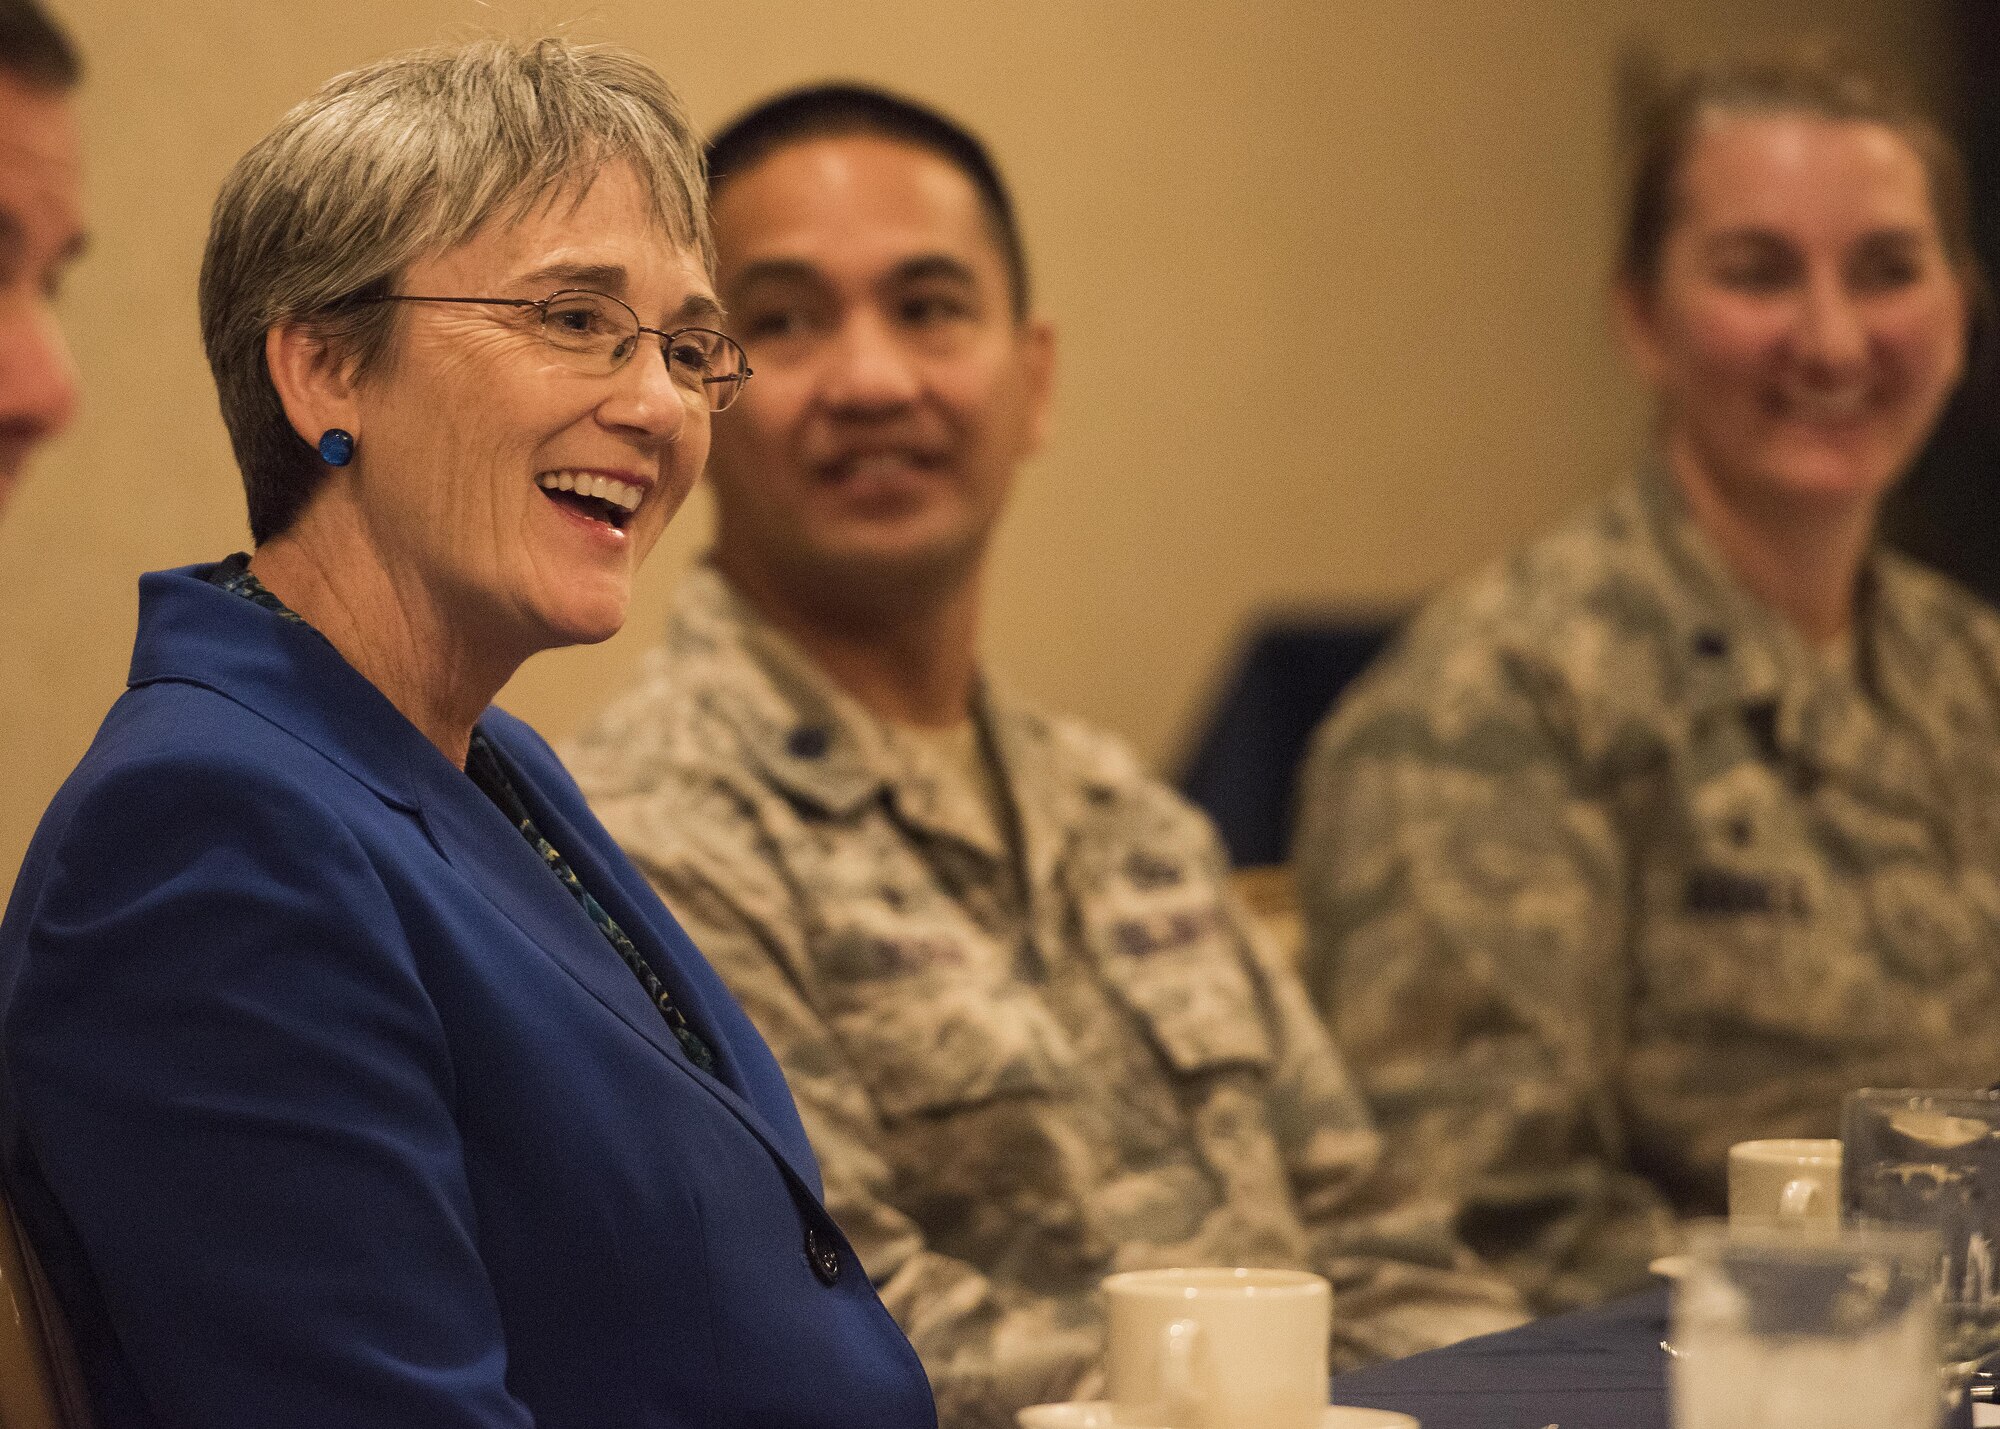 Secretary of the Air Force Heather Wilson speaks with squadron commanders at Minot Air Force Base, N.D., Sept. 7, 2017. This was Wilson’s first visit to America’s only dual-wing, nuclear-capable military installation as SECAF.
(U.S. Air Force photo/Senior Airman J.T. Armstrong)